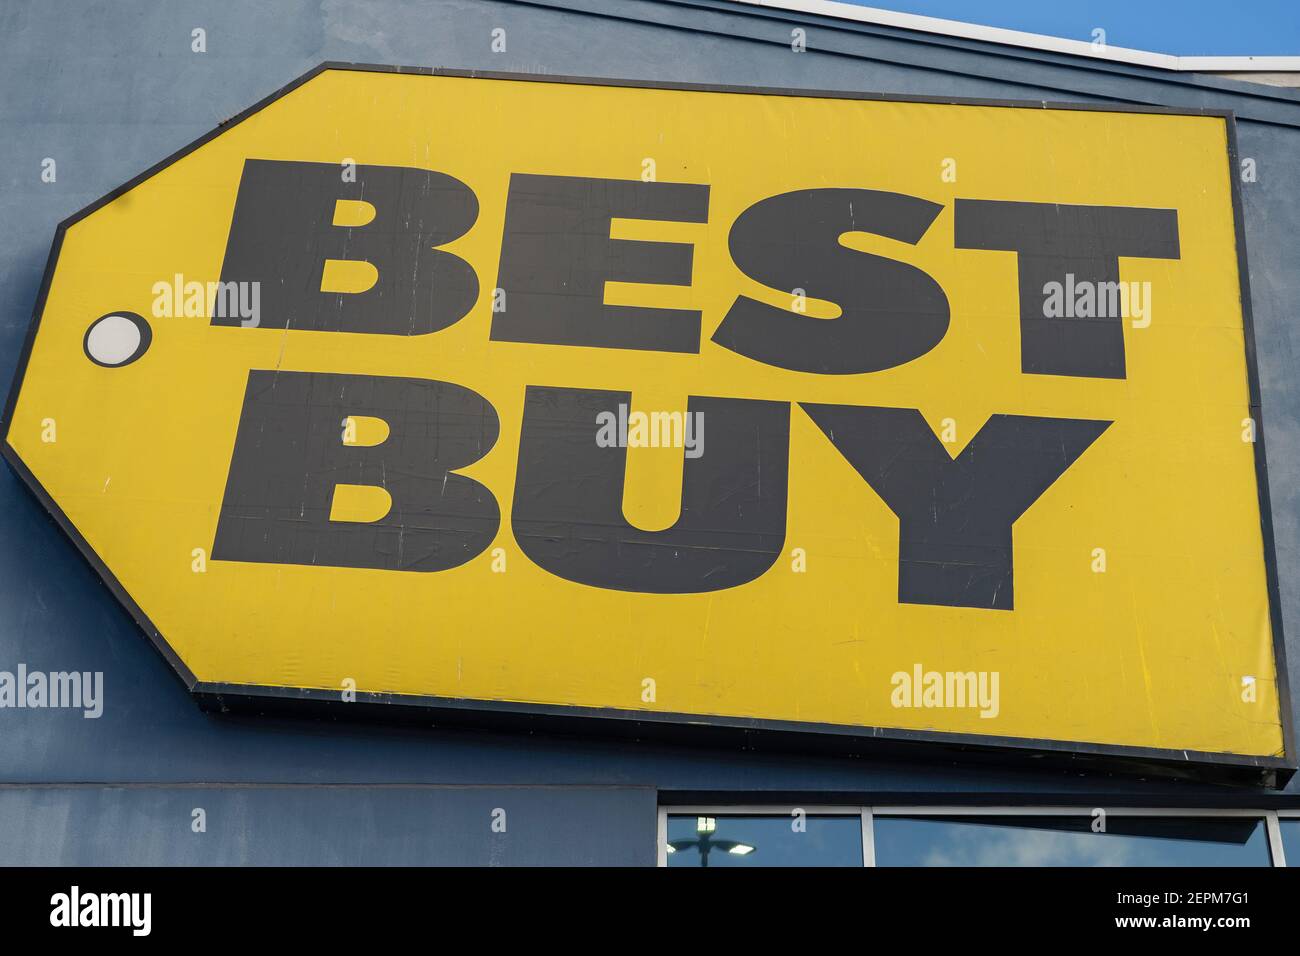 NEW YORK, NY – FEBRUARY 27:  A Best Buy sign and Logo seen above a Best Buy store in Queens on February 27, 2021 in New York City.  Best Buy Co. (BBY) lays off 5,000 workers, the majority of whom worked full-time and adding approximately 2,000 new part-time positions as it shifts focus to online sales.  The pandemic has accelerated Best Buy's transition to selling online said Chief Executive Corie Barry on a call with analysts on Thursday. Credit: Ron Adar/Alamy Live News Stock Photo